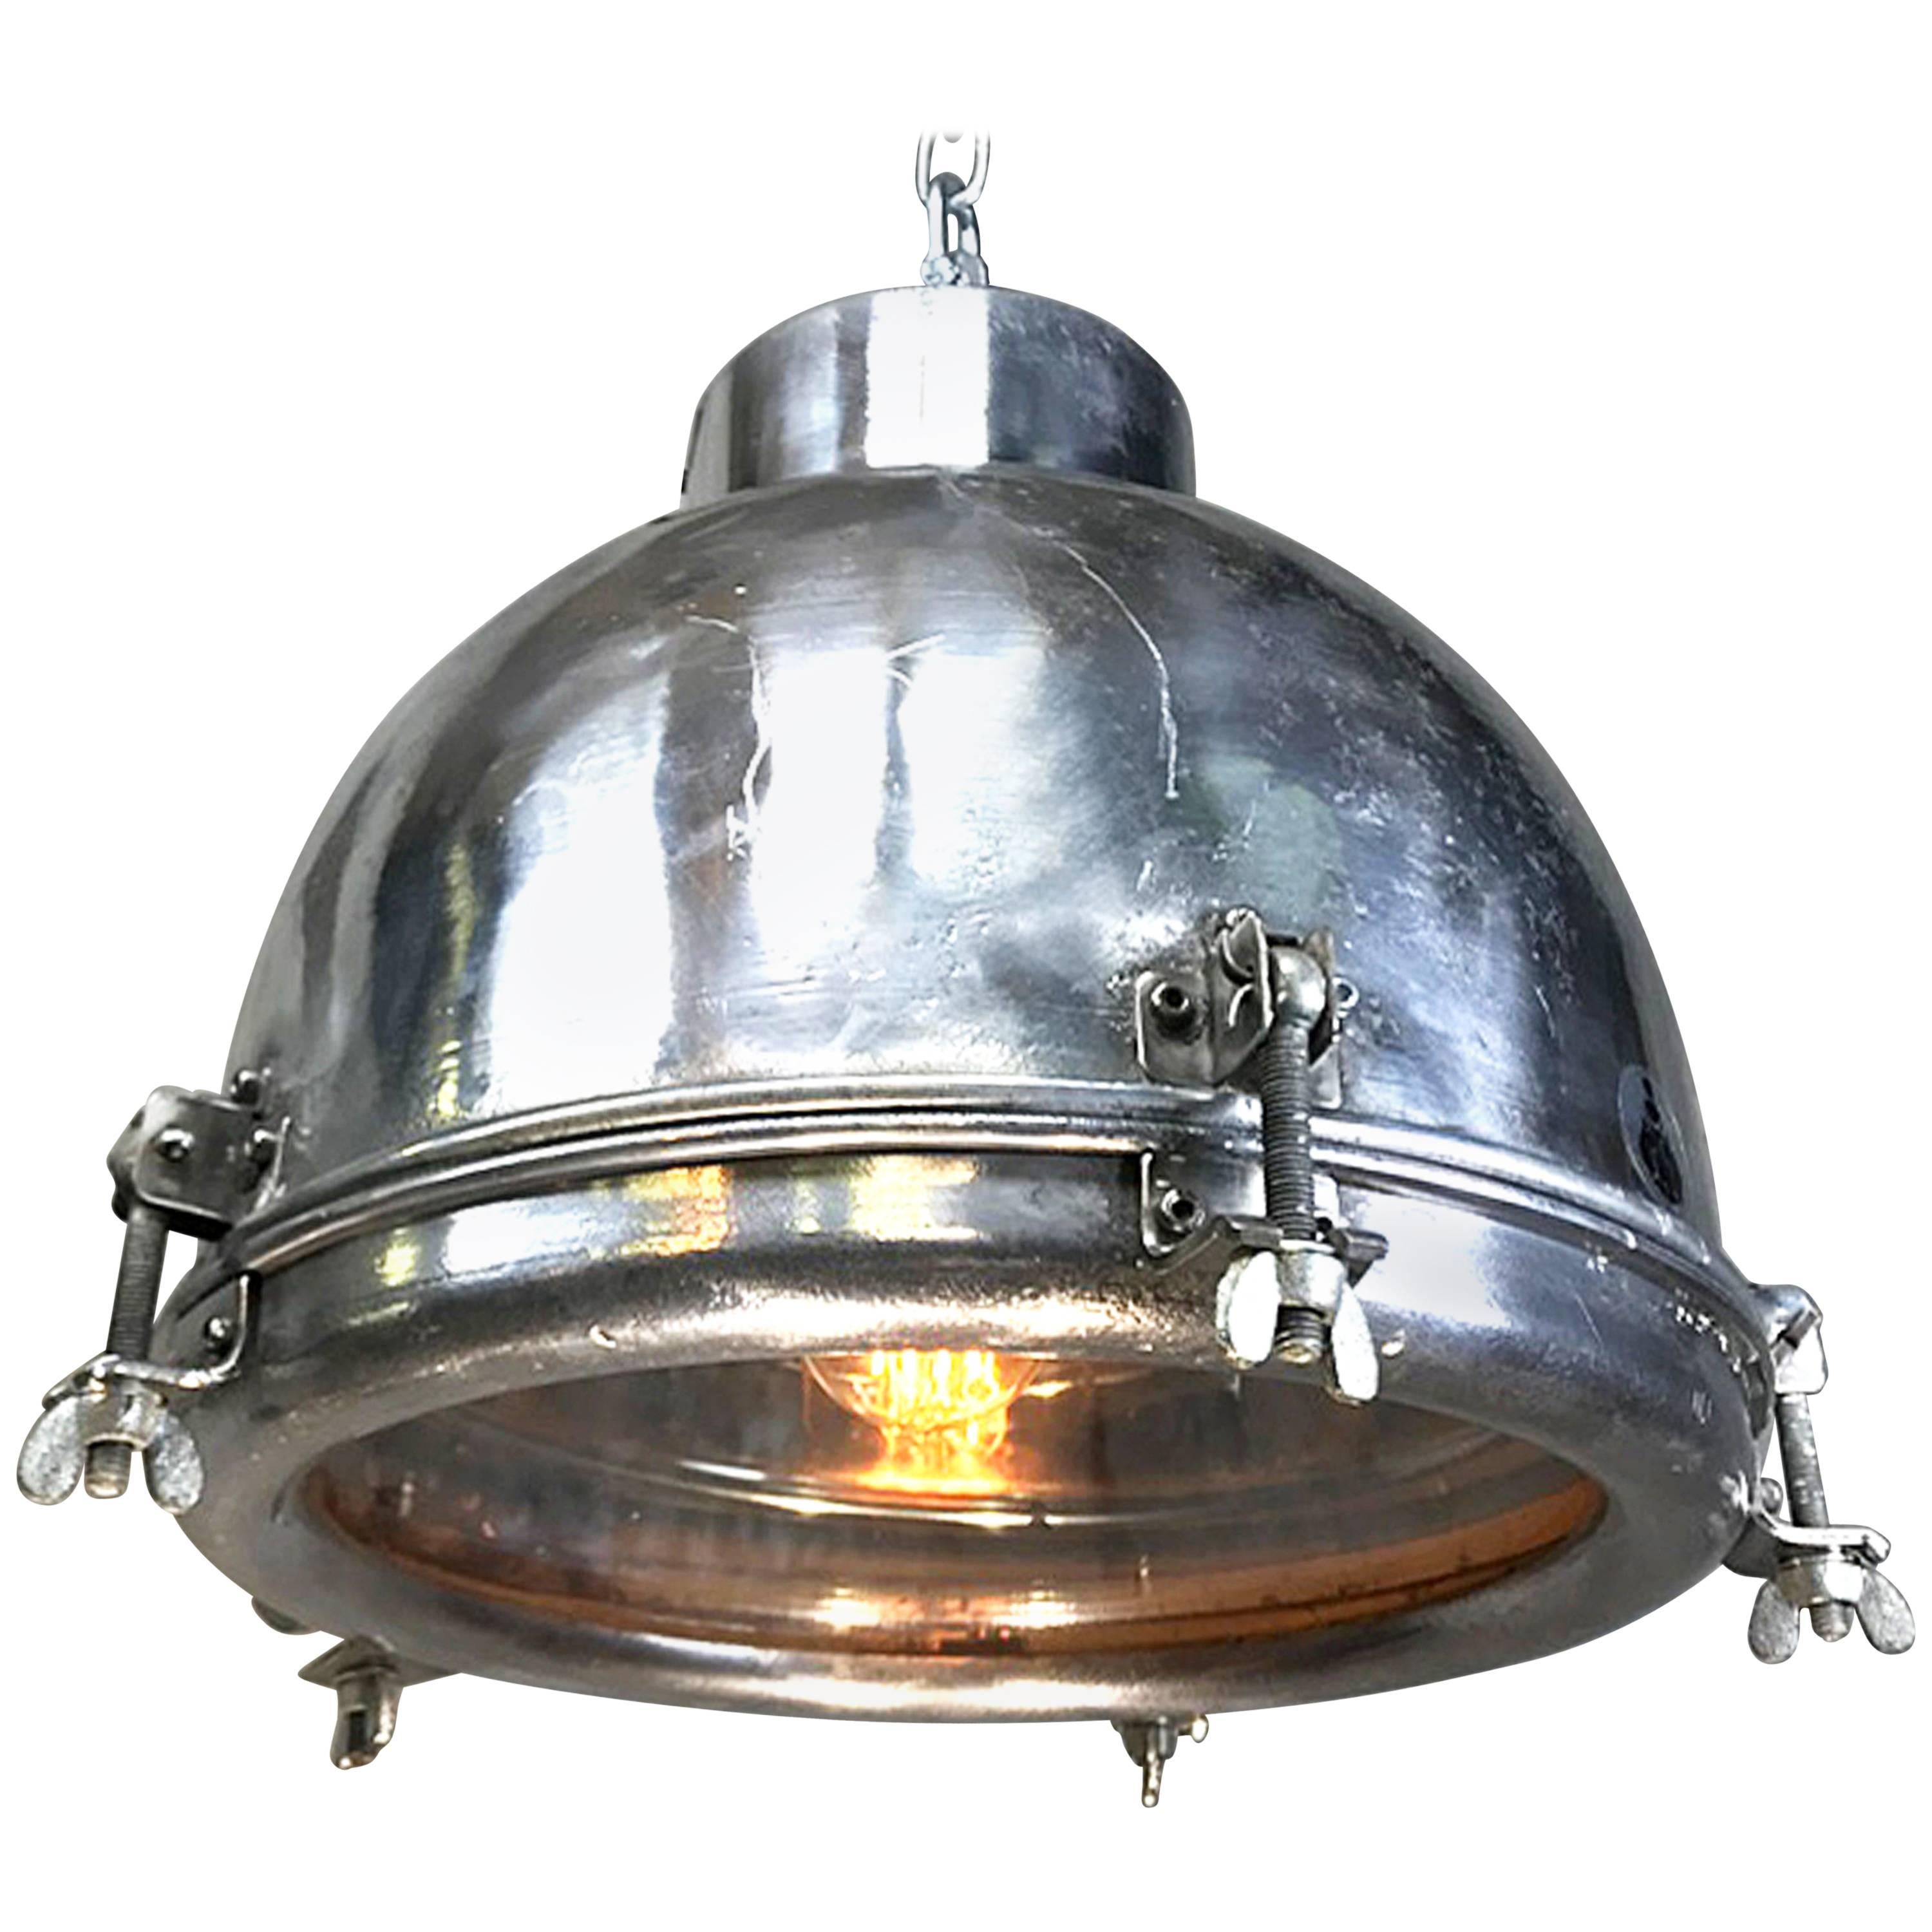 1970s Japanese Vintage Industrial Aluminium Dome Pendant with Steel Fittings